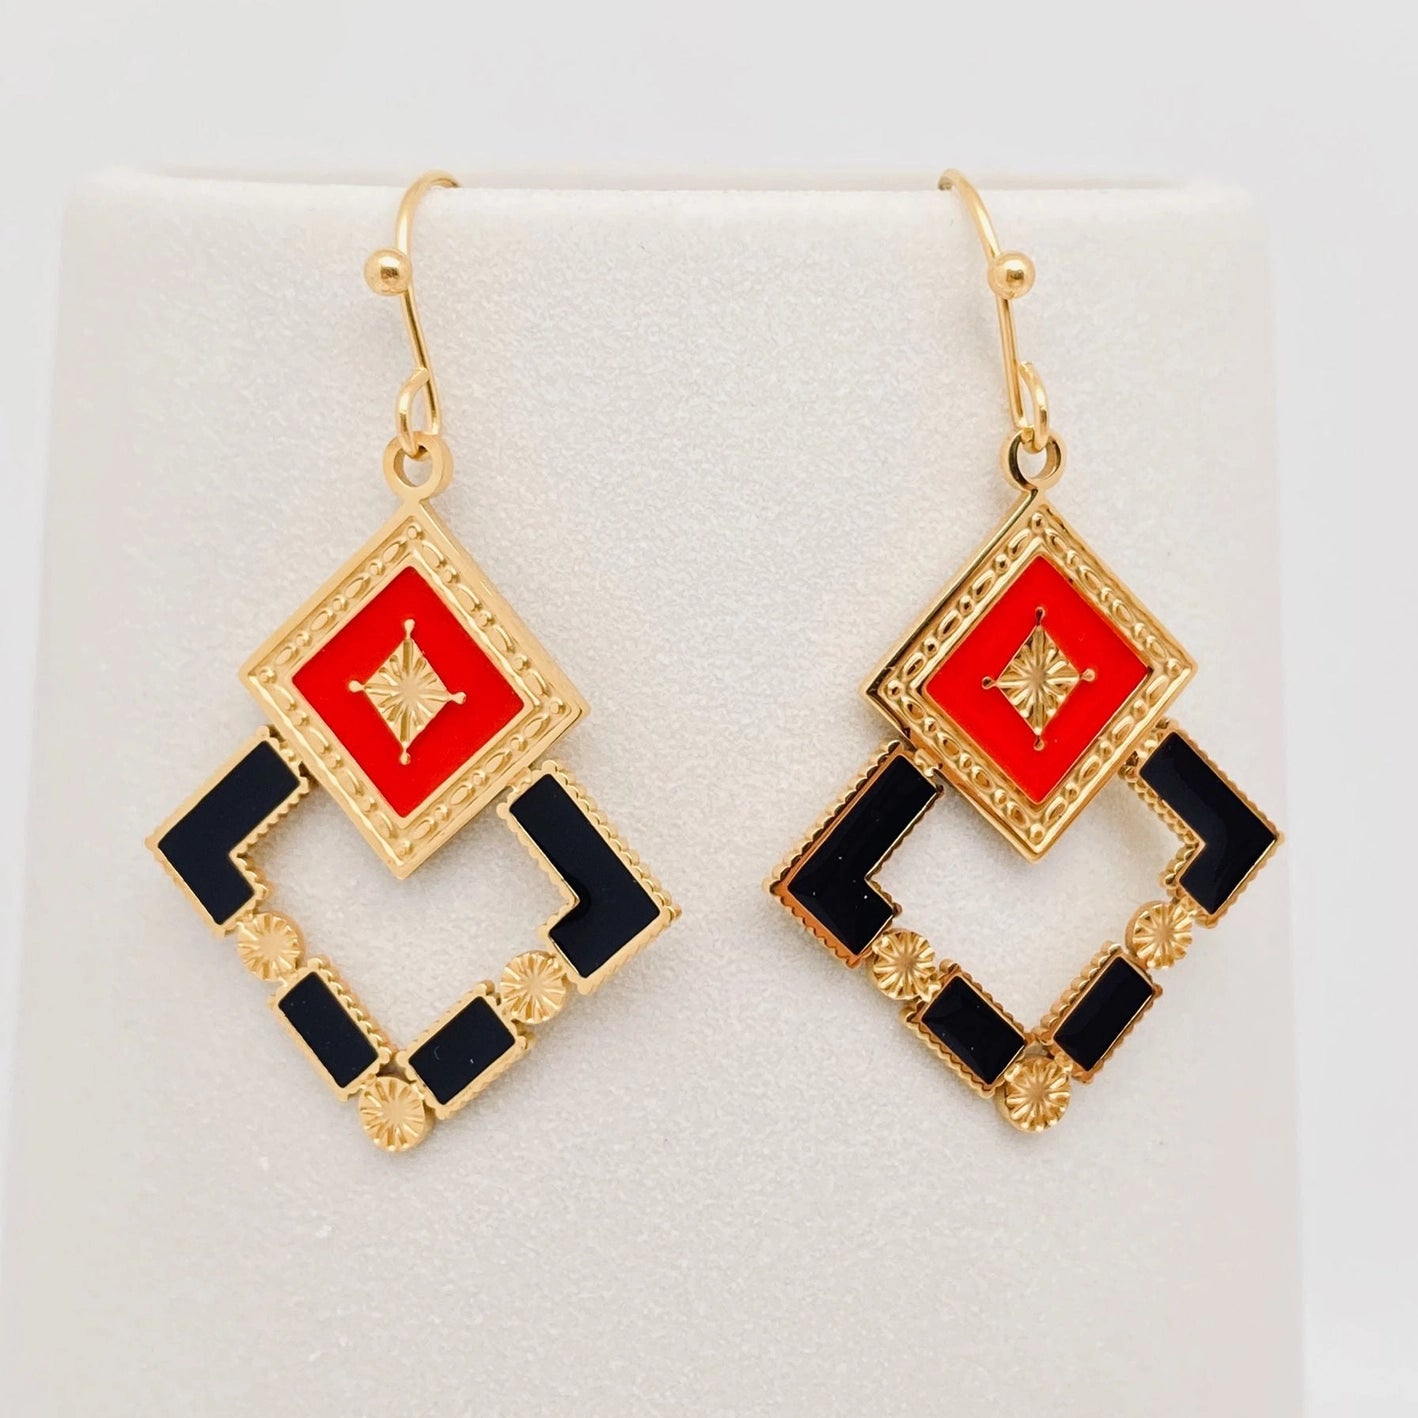 shiny gold metal dangle earrings in the shape of two overlapping squares with small sunburst detailing and black & rich red enameled panels